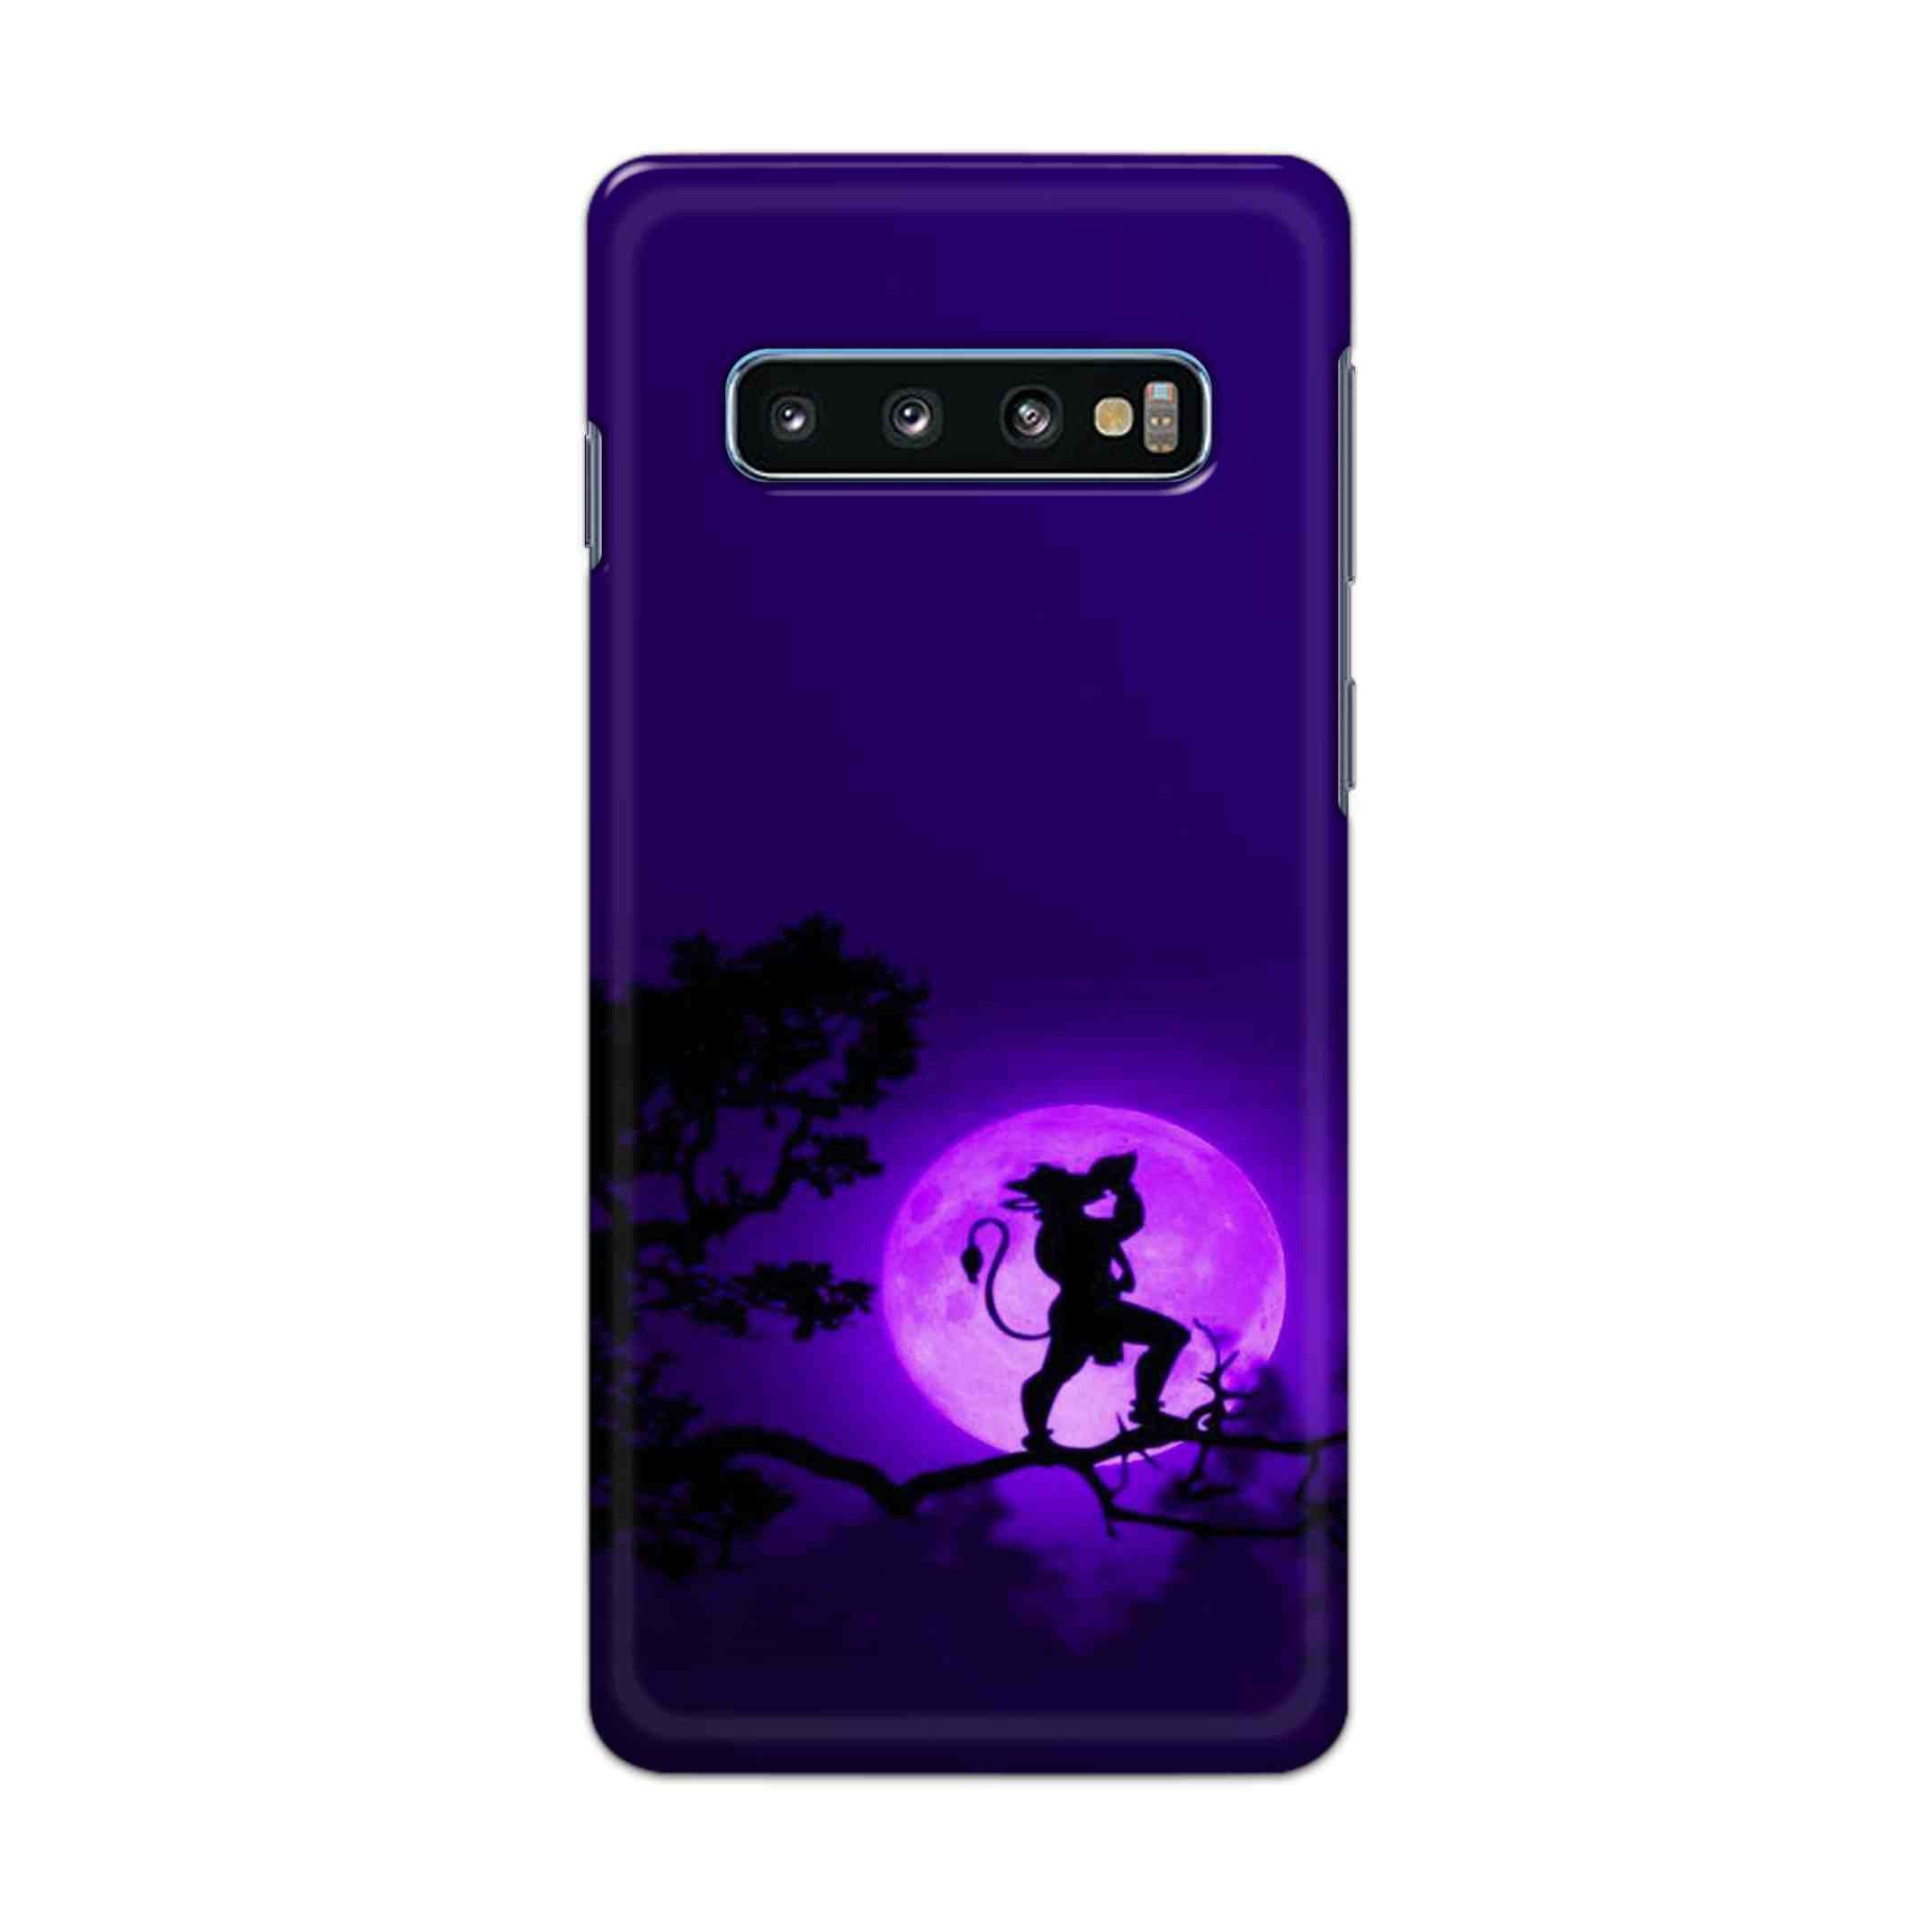 Buy Hanuman Hard Back Mobile Phone Case Cover For Samsung Galaxy S10 Plus Online